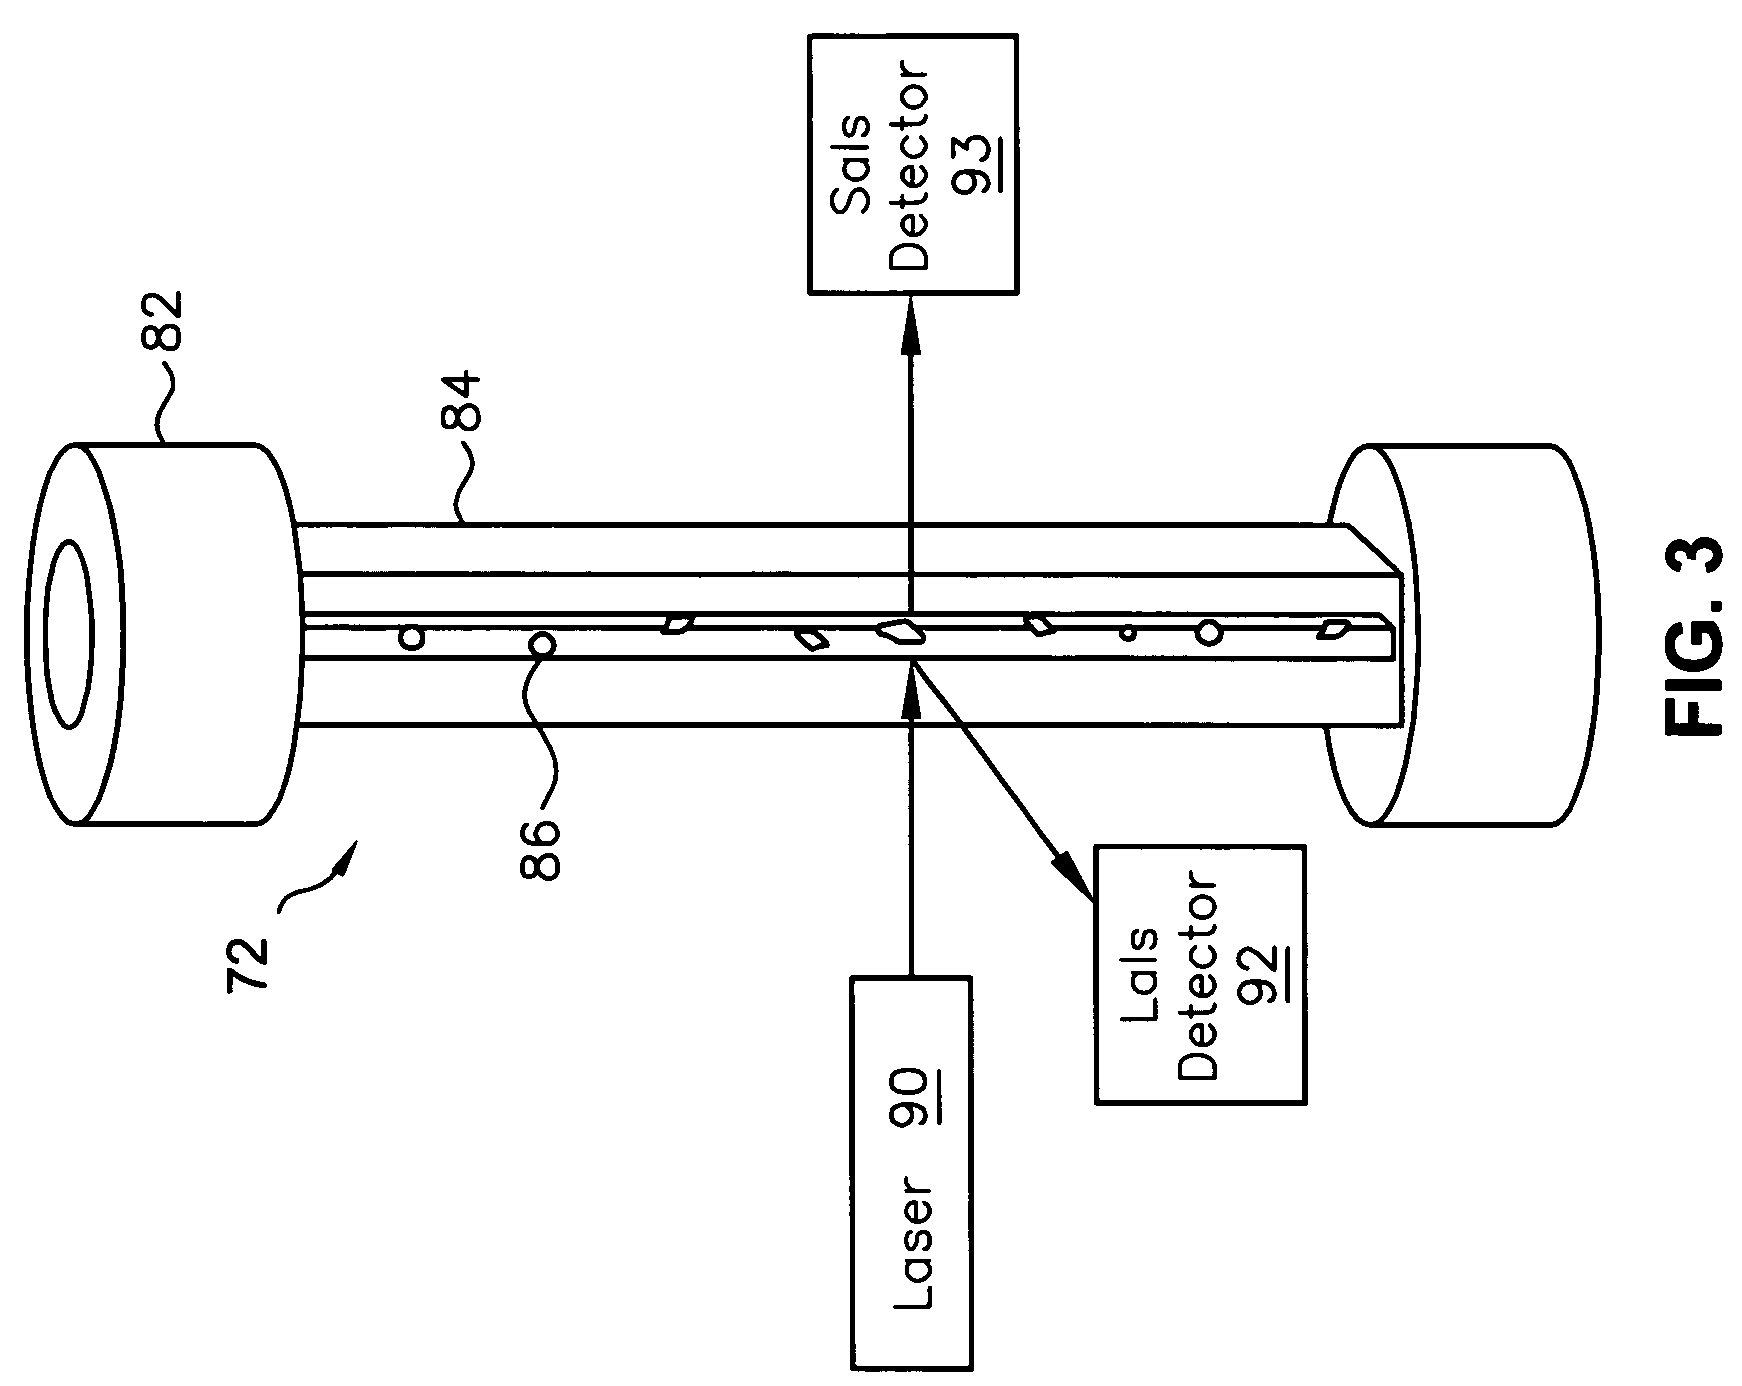 Automated cell sample enrichment preparation method